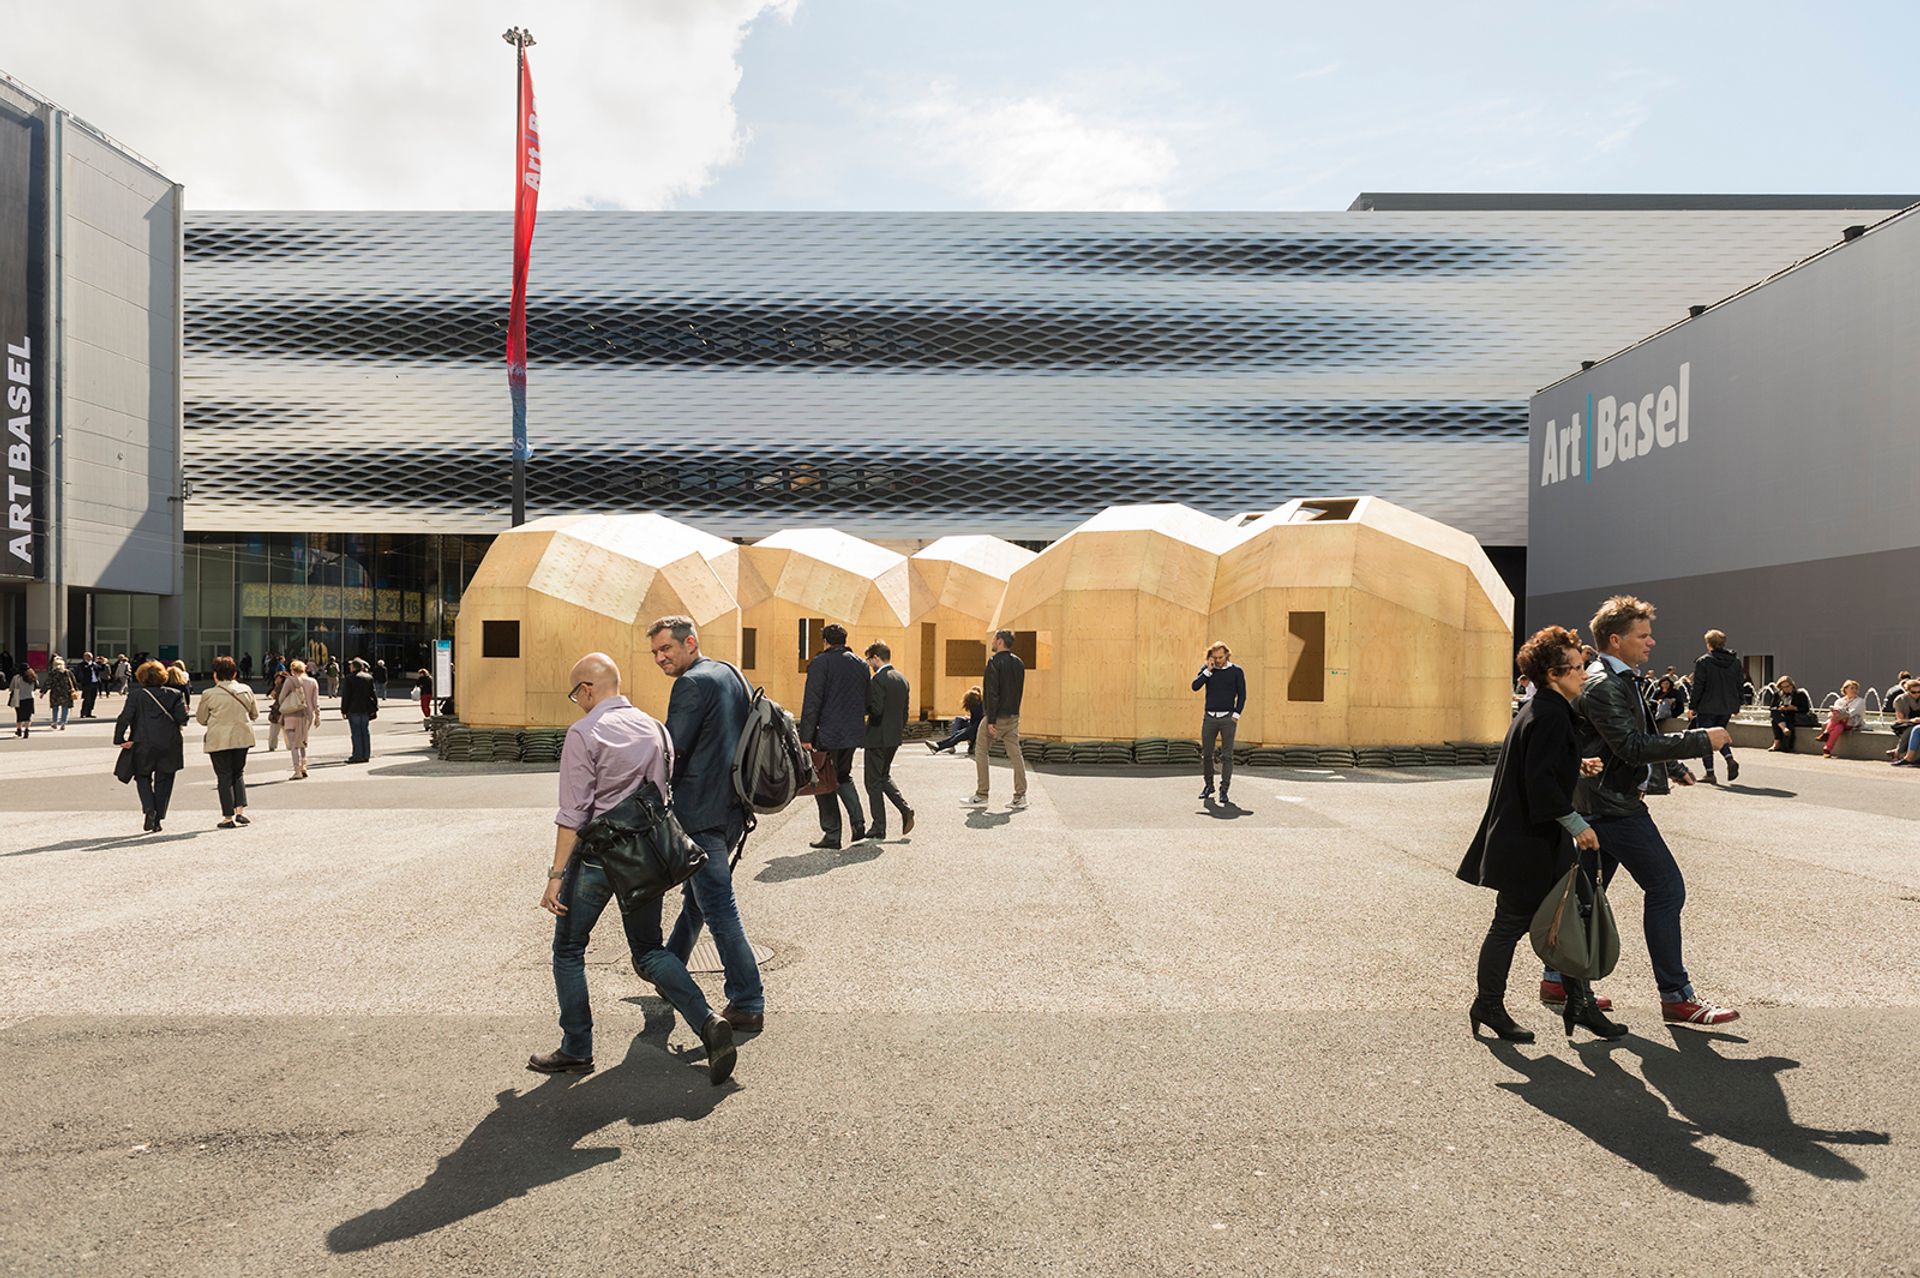 Basel's Messeplatz will host a series of projects organised by Creative Time Art Basel